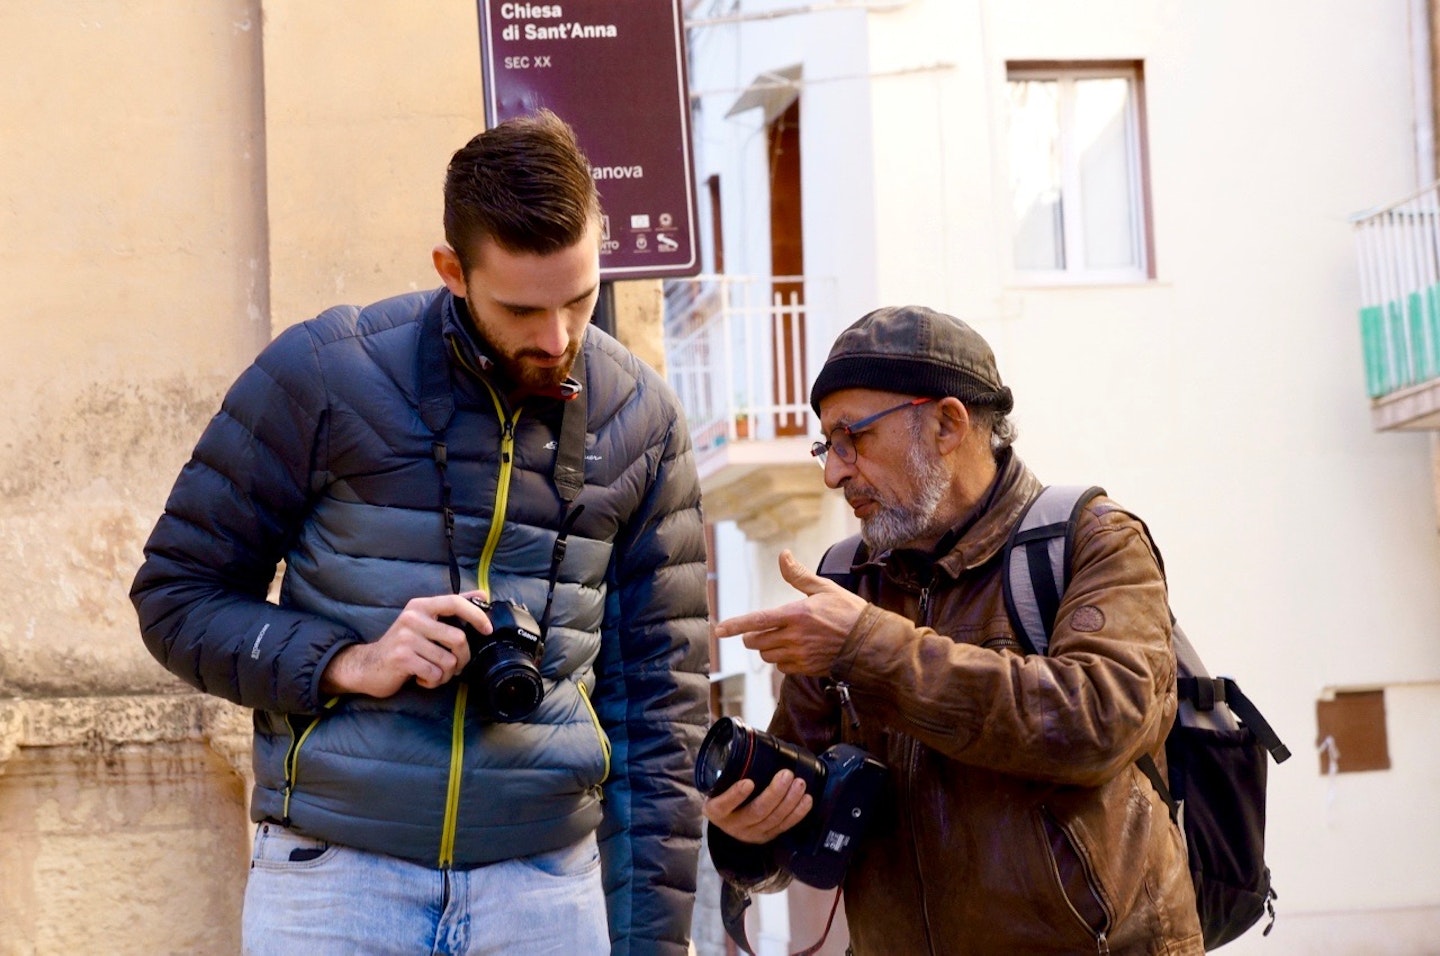 Learning photography and photojournalism from a master in Italy. Courtesy of Geetika Agrawal.